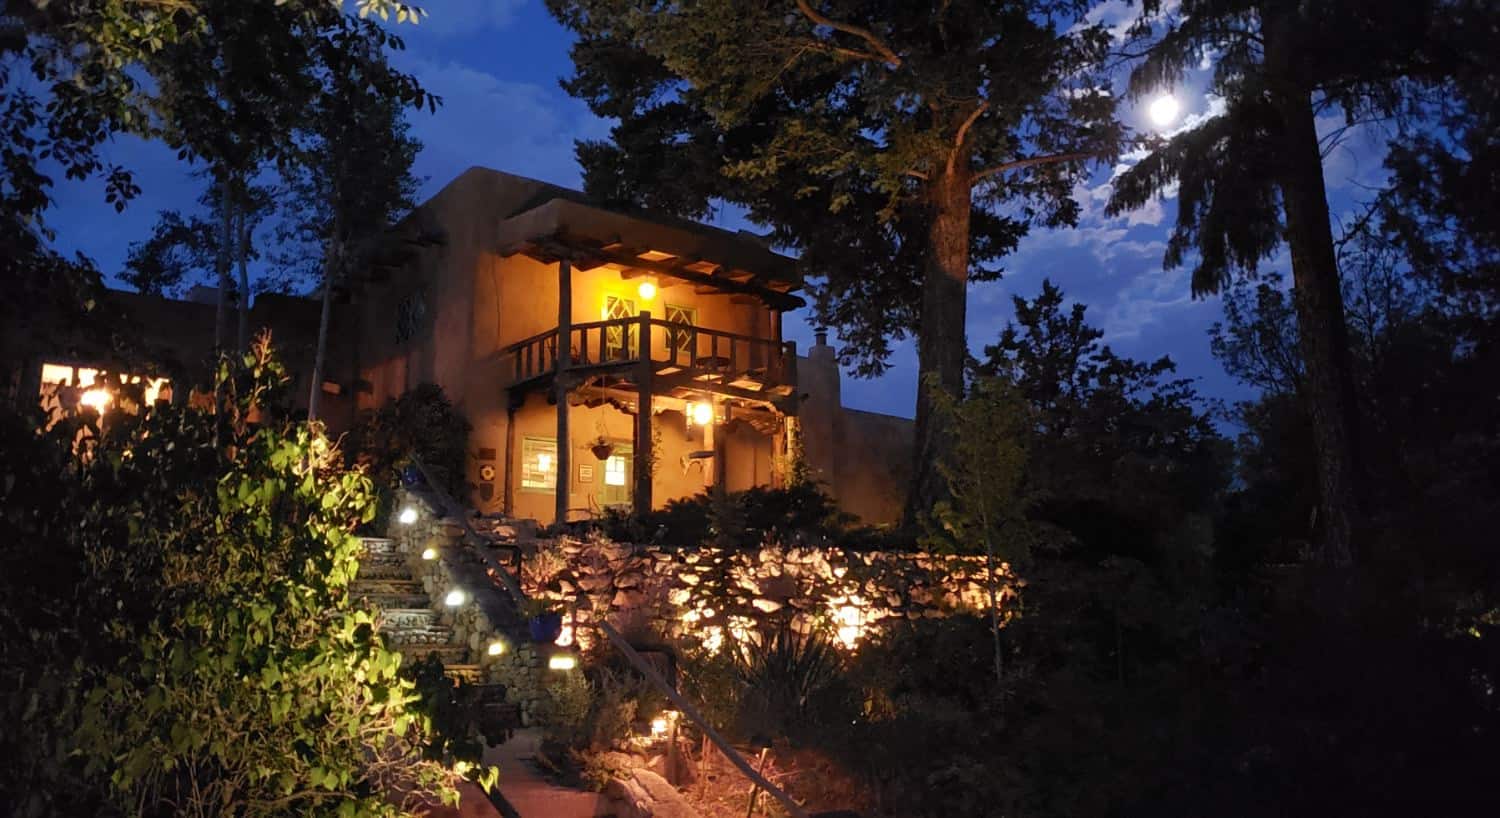 Exterior view of the property at dusk surrounded by large green trees, green vegetation, stone walkways, and lighting